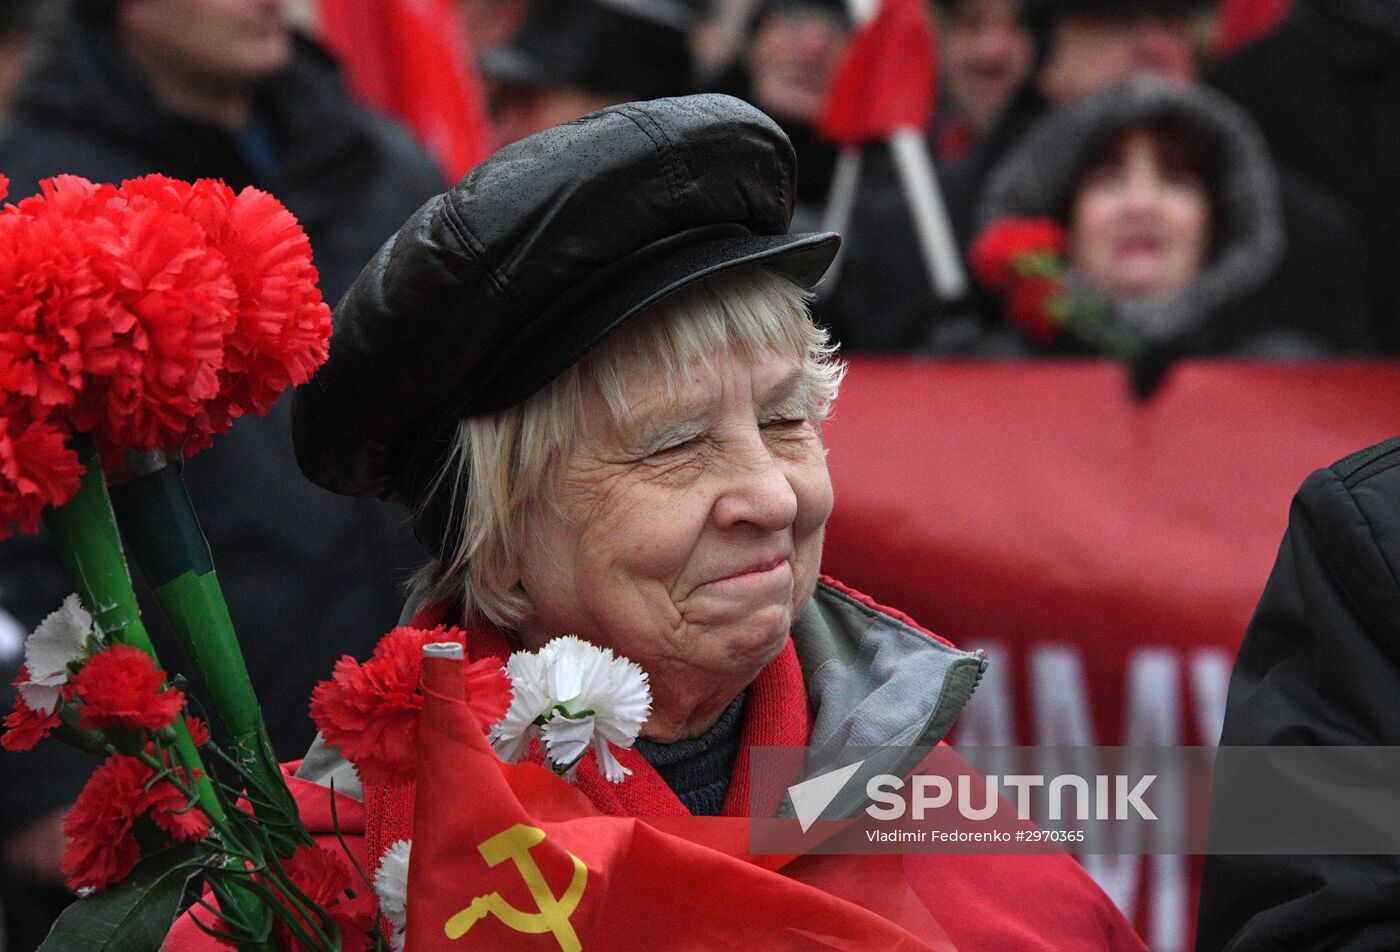 Processions marking 99th anniversary of October Revolution in Moscow